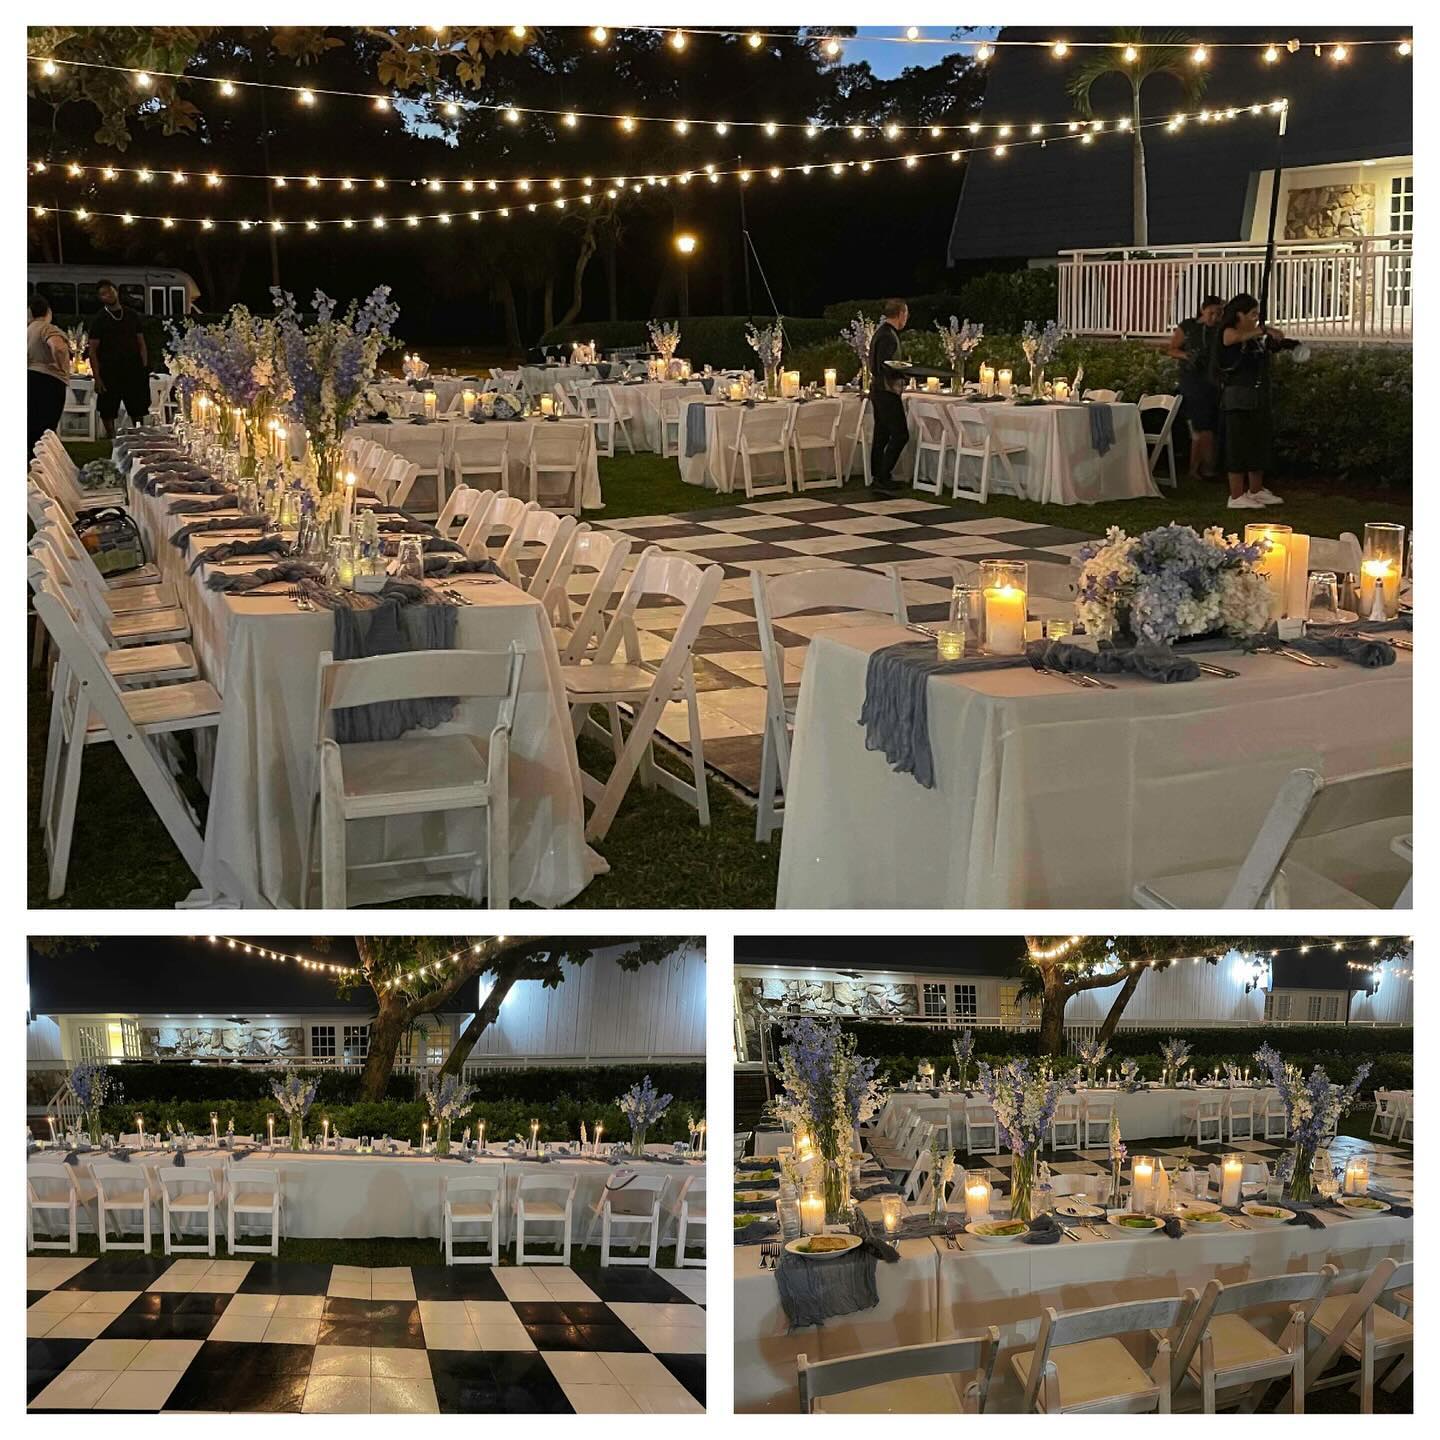 Picture perfect outdoor wedding at Innisbrook Resort. We provided the Market Lights and Black & White Checkered Danceflo